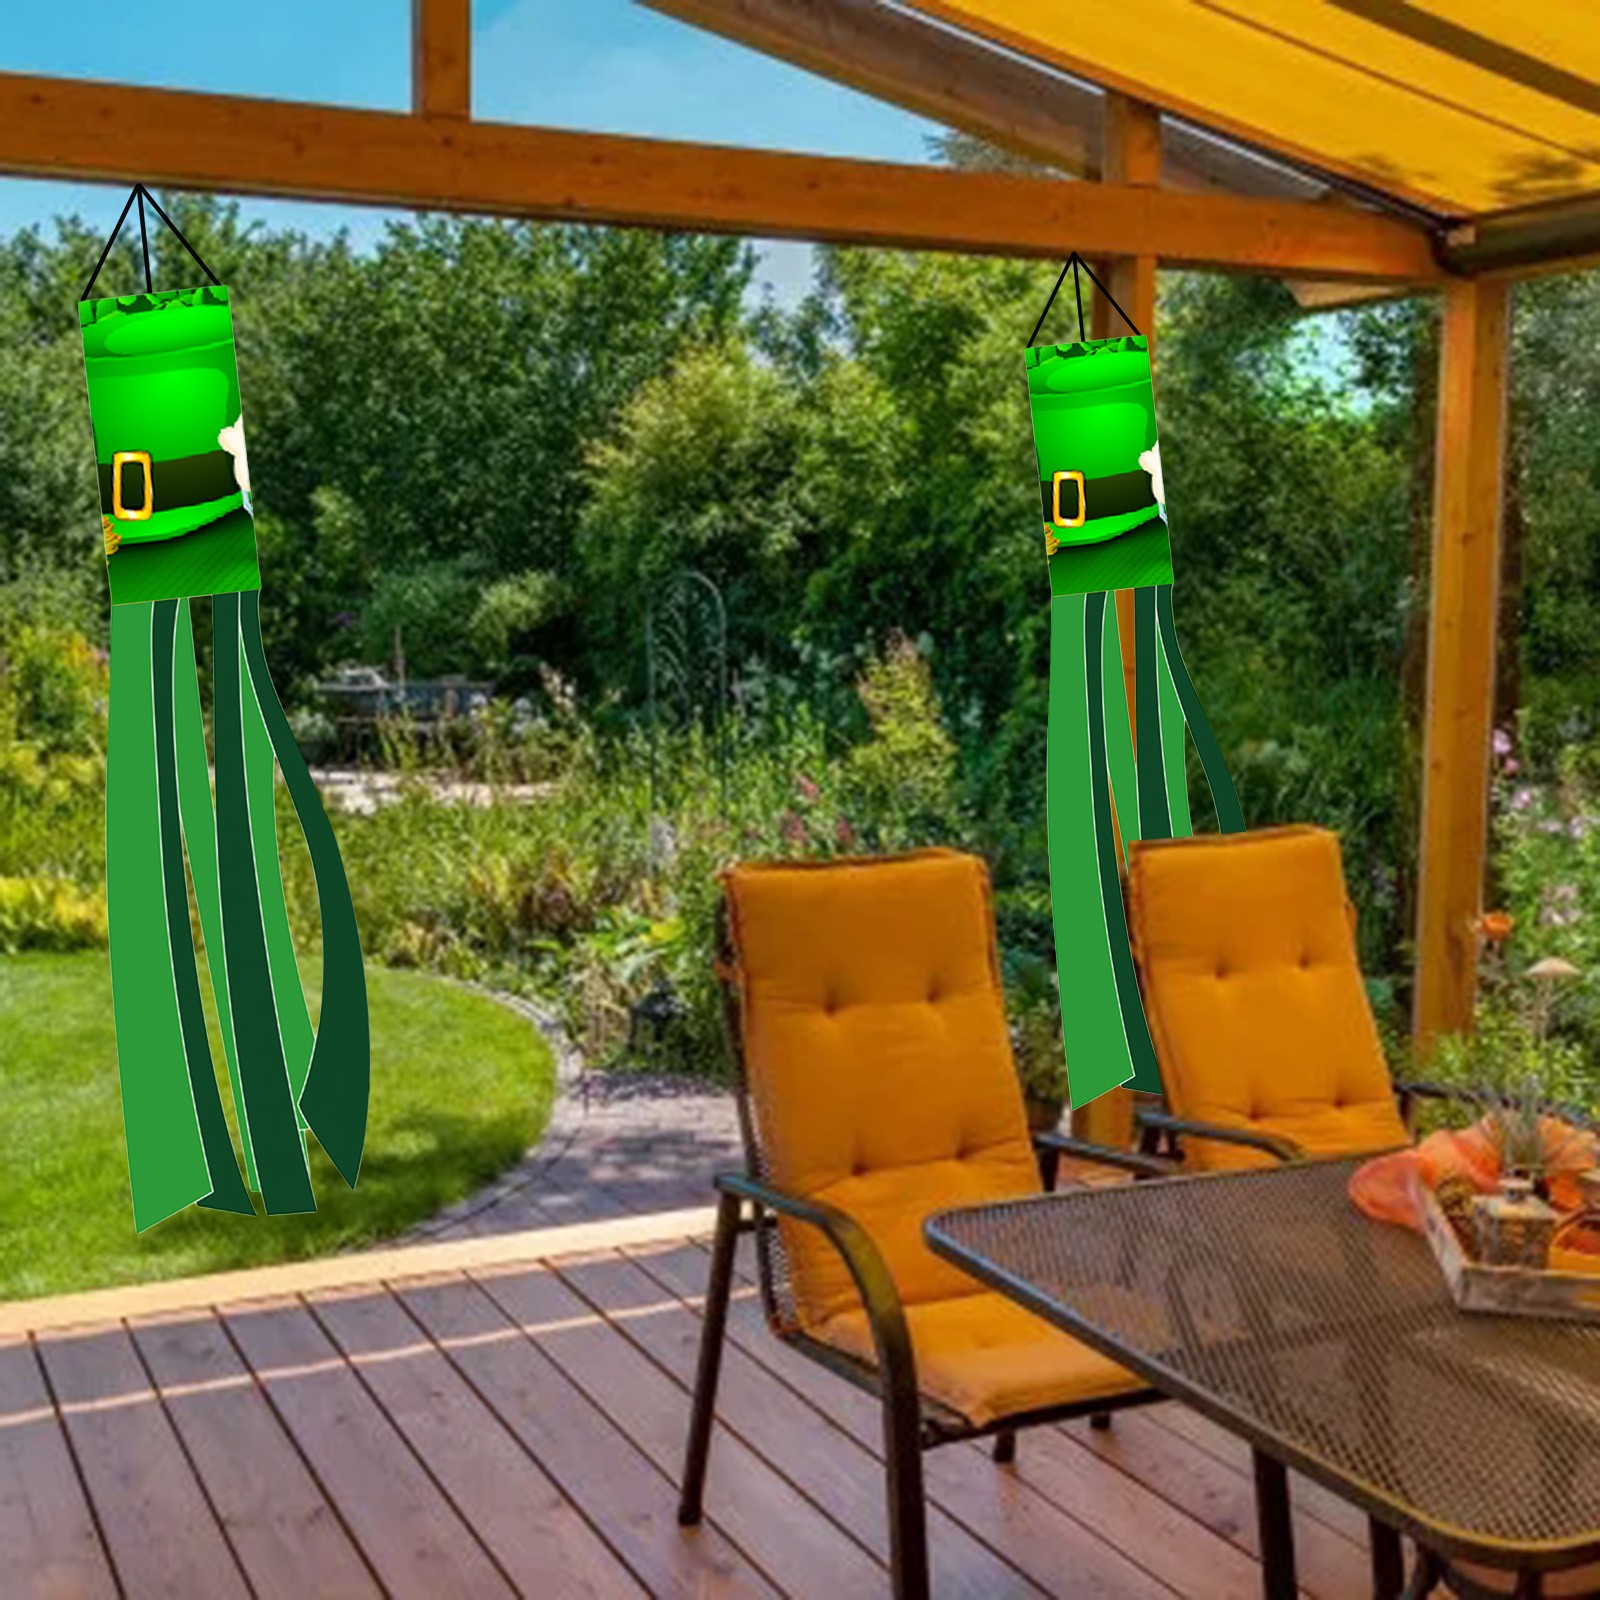 wofedyo home decor st. patrick's day windsock polyester garden windsock lawn garden party deco bathroom decor wall decor - image 3 of 4